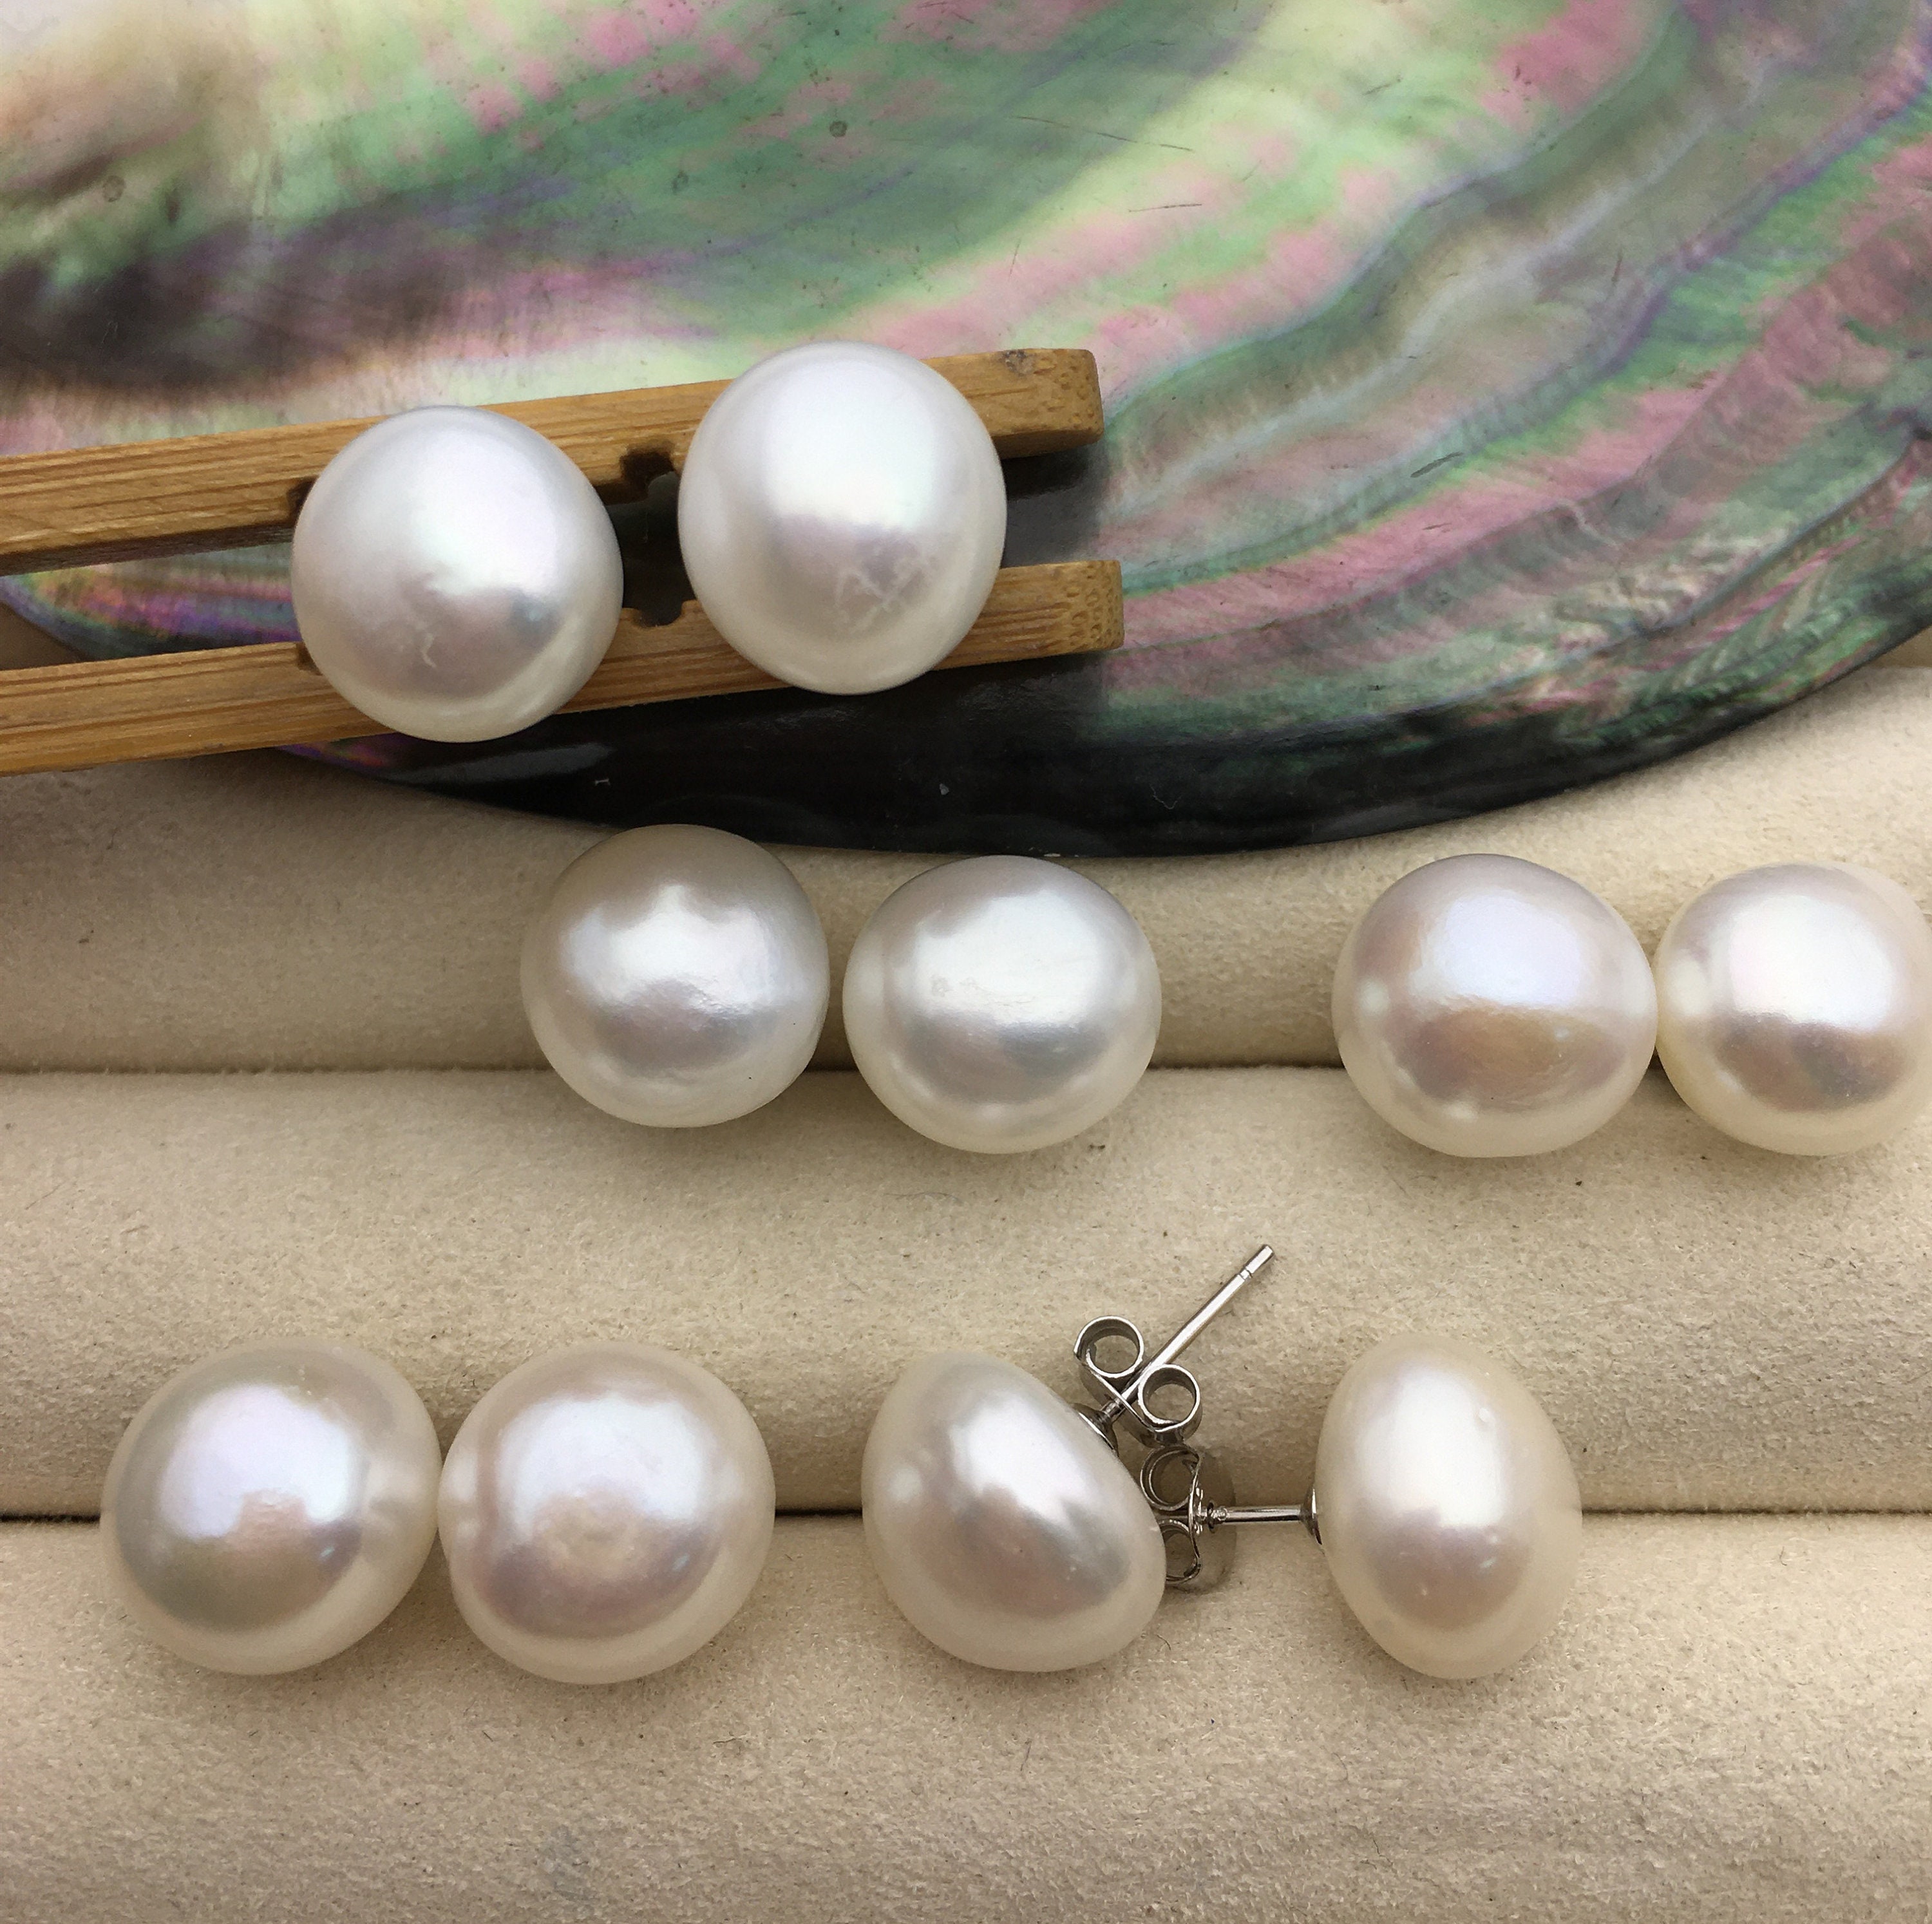 Natural Near Round Freshwater Cultured Pearls Beads for Jewelry Making DIY  (10.5mm/Big White Nuclear Edison Pearls)